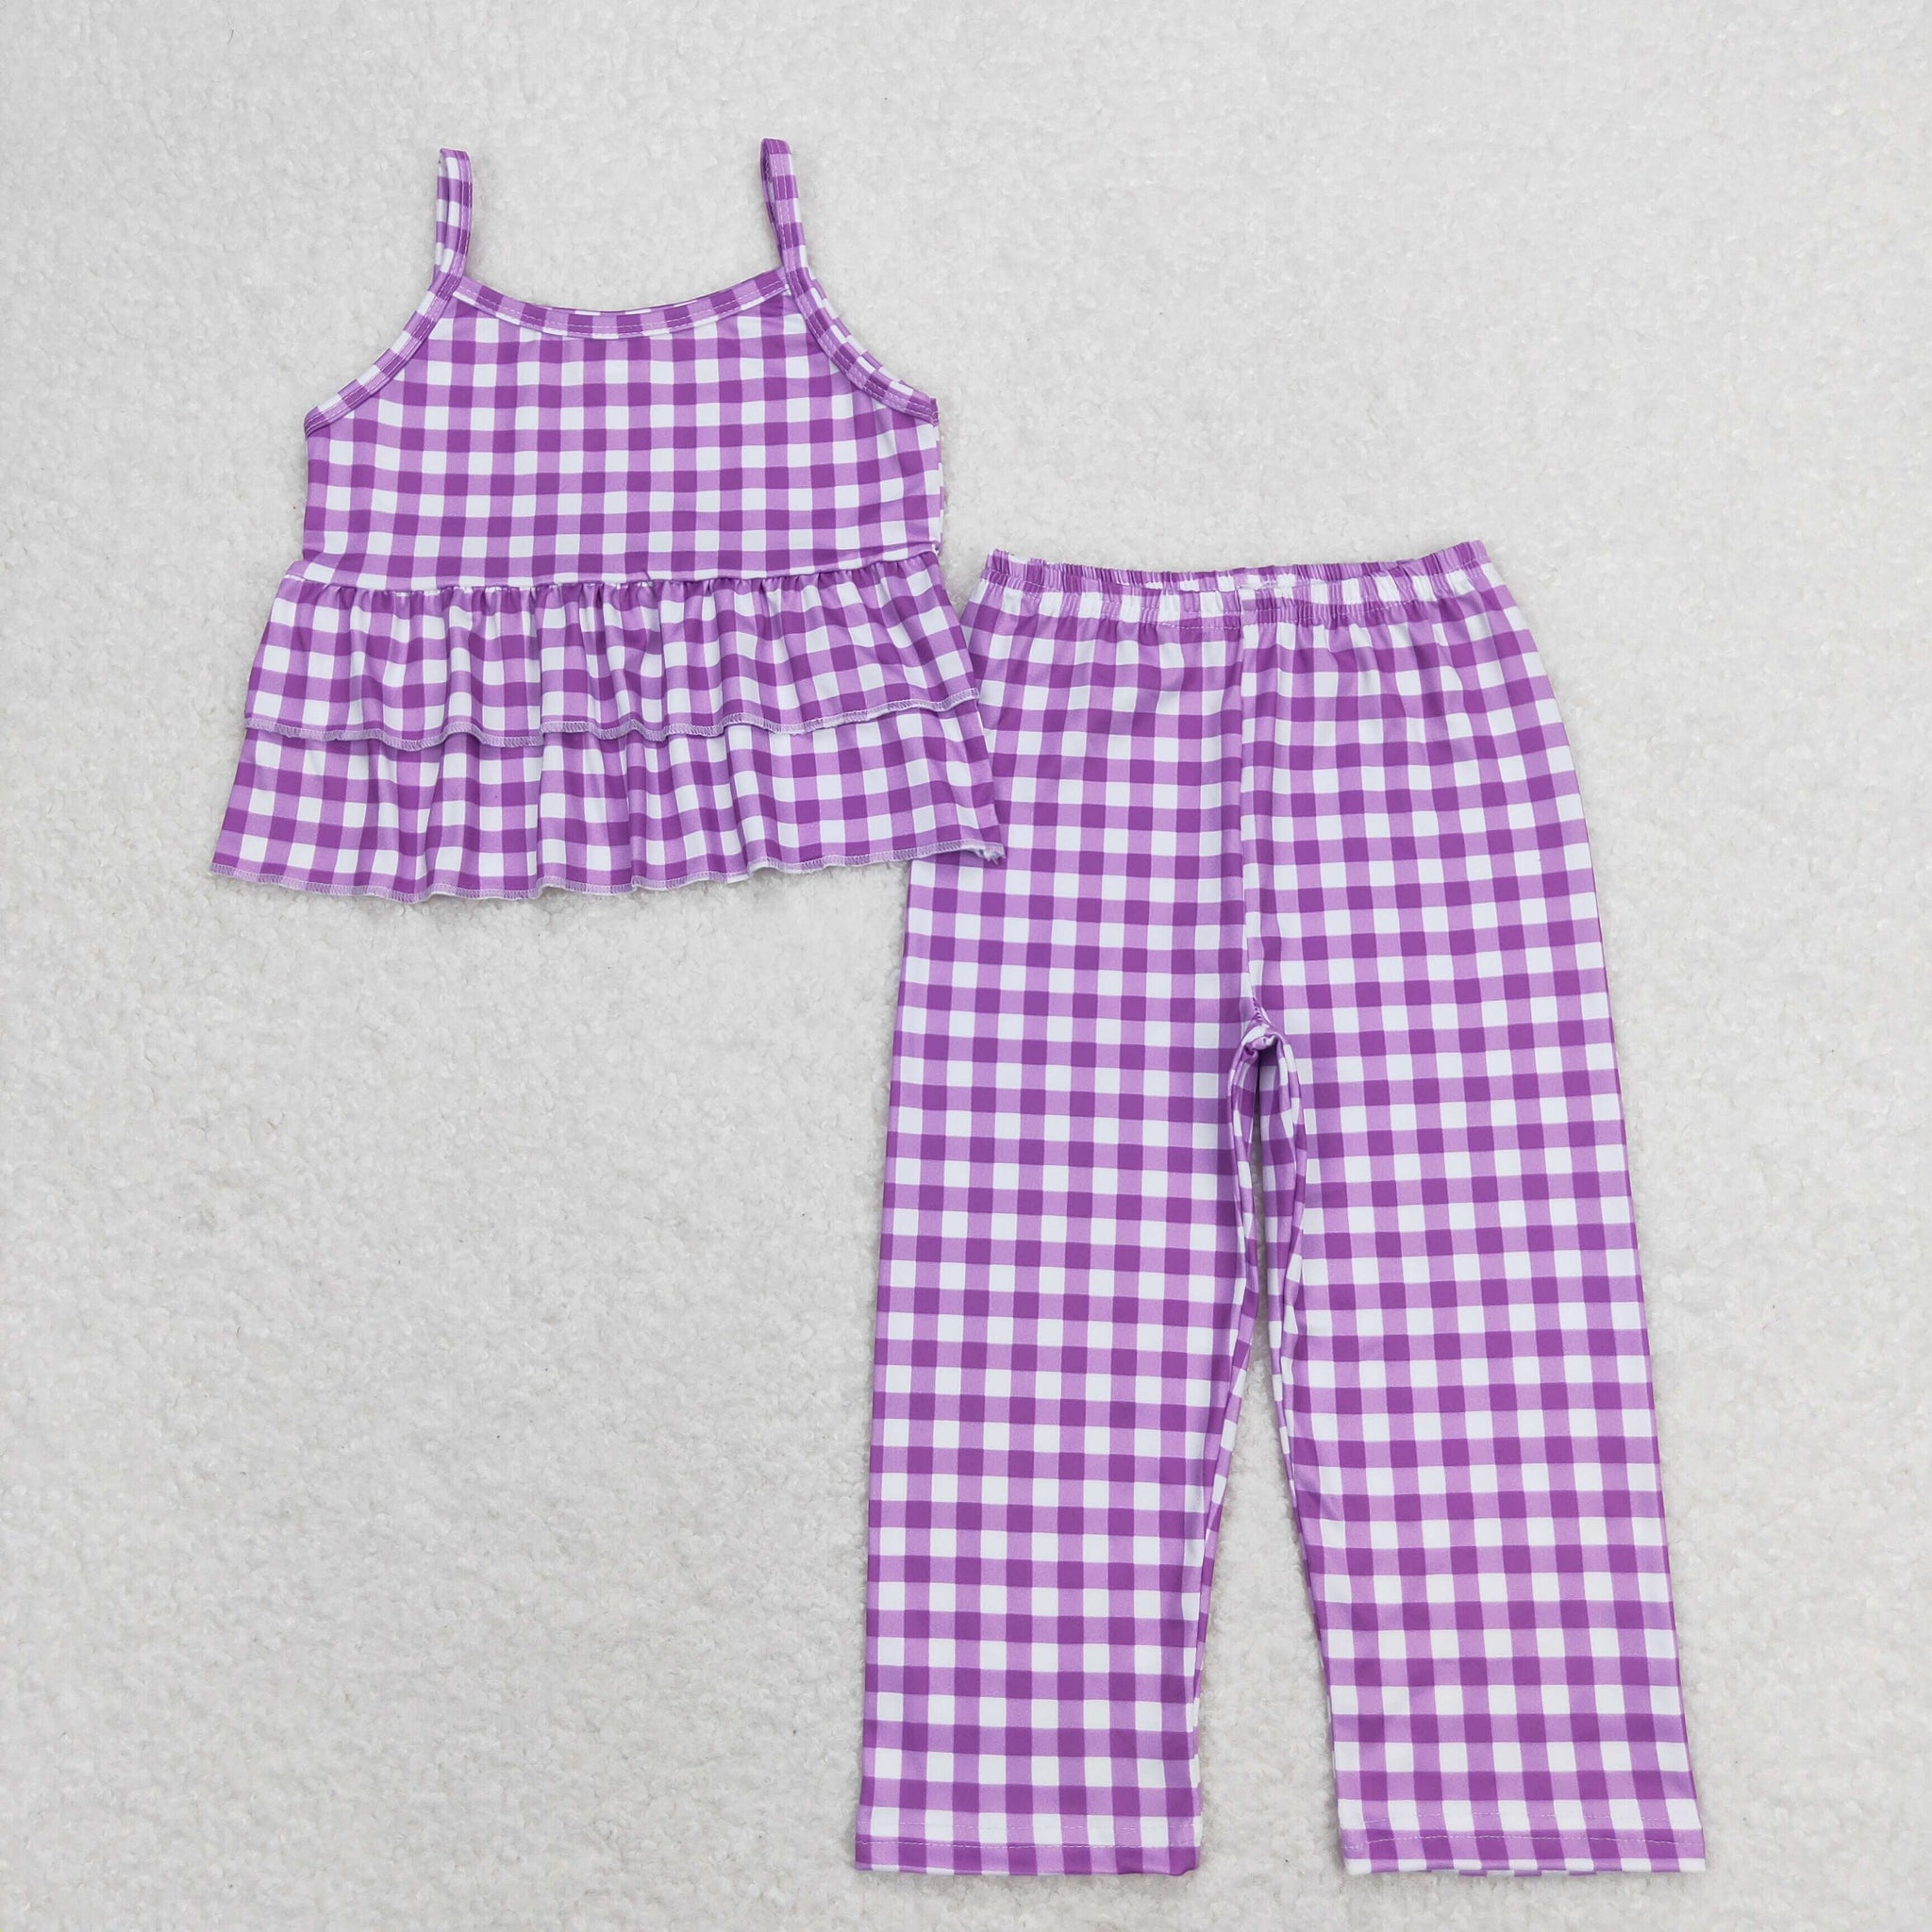 GSPO1379 RTS baby girl clothes purple plaid girls spring summer outfit